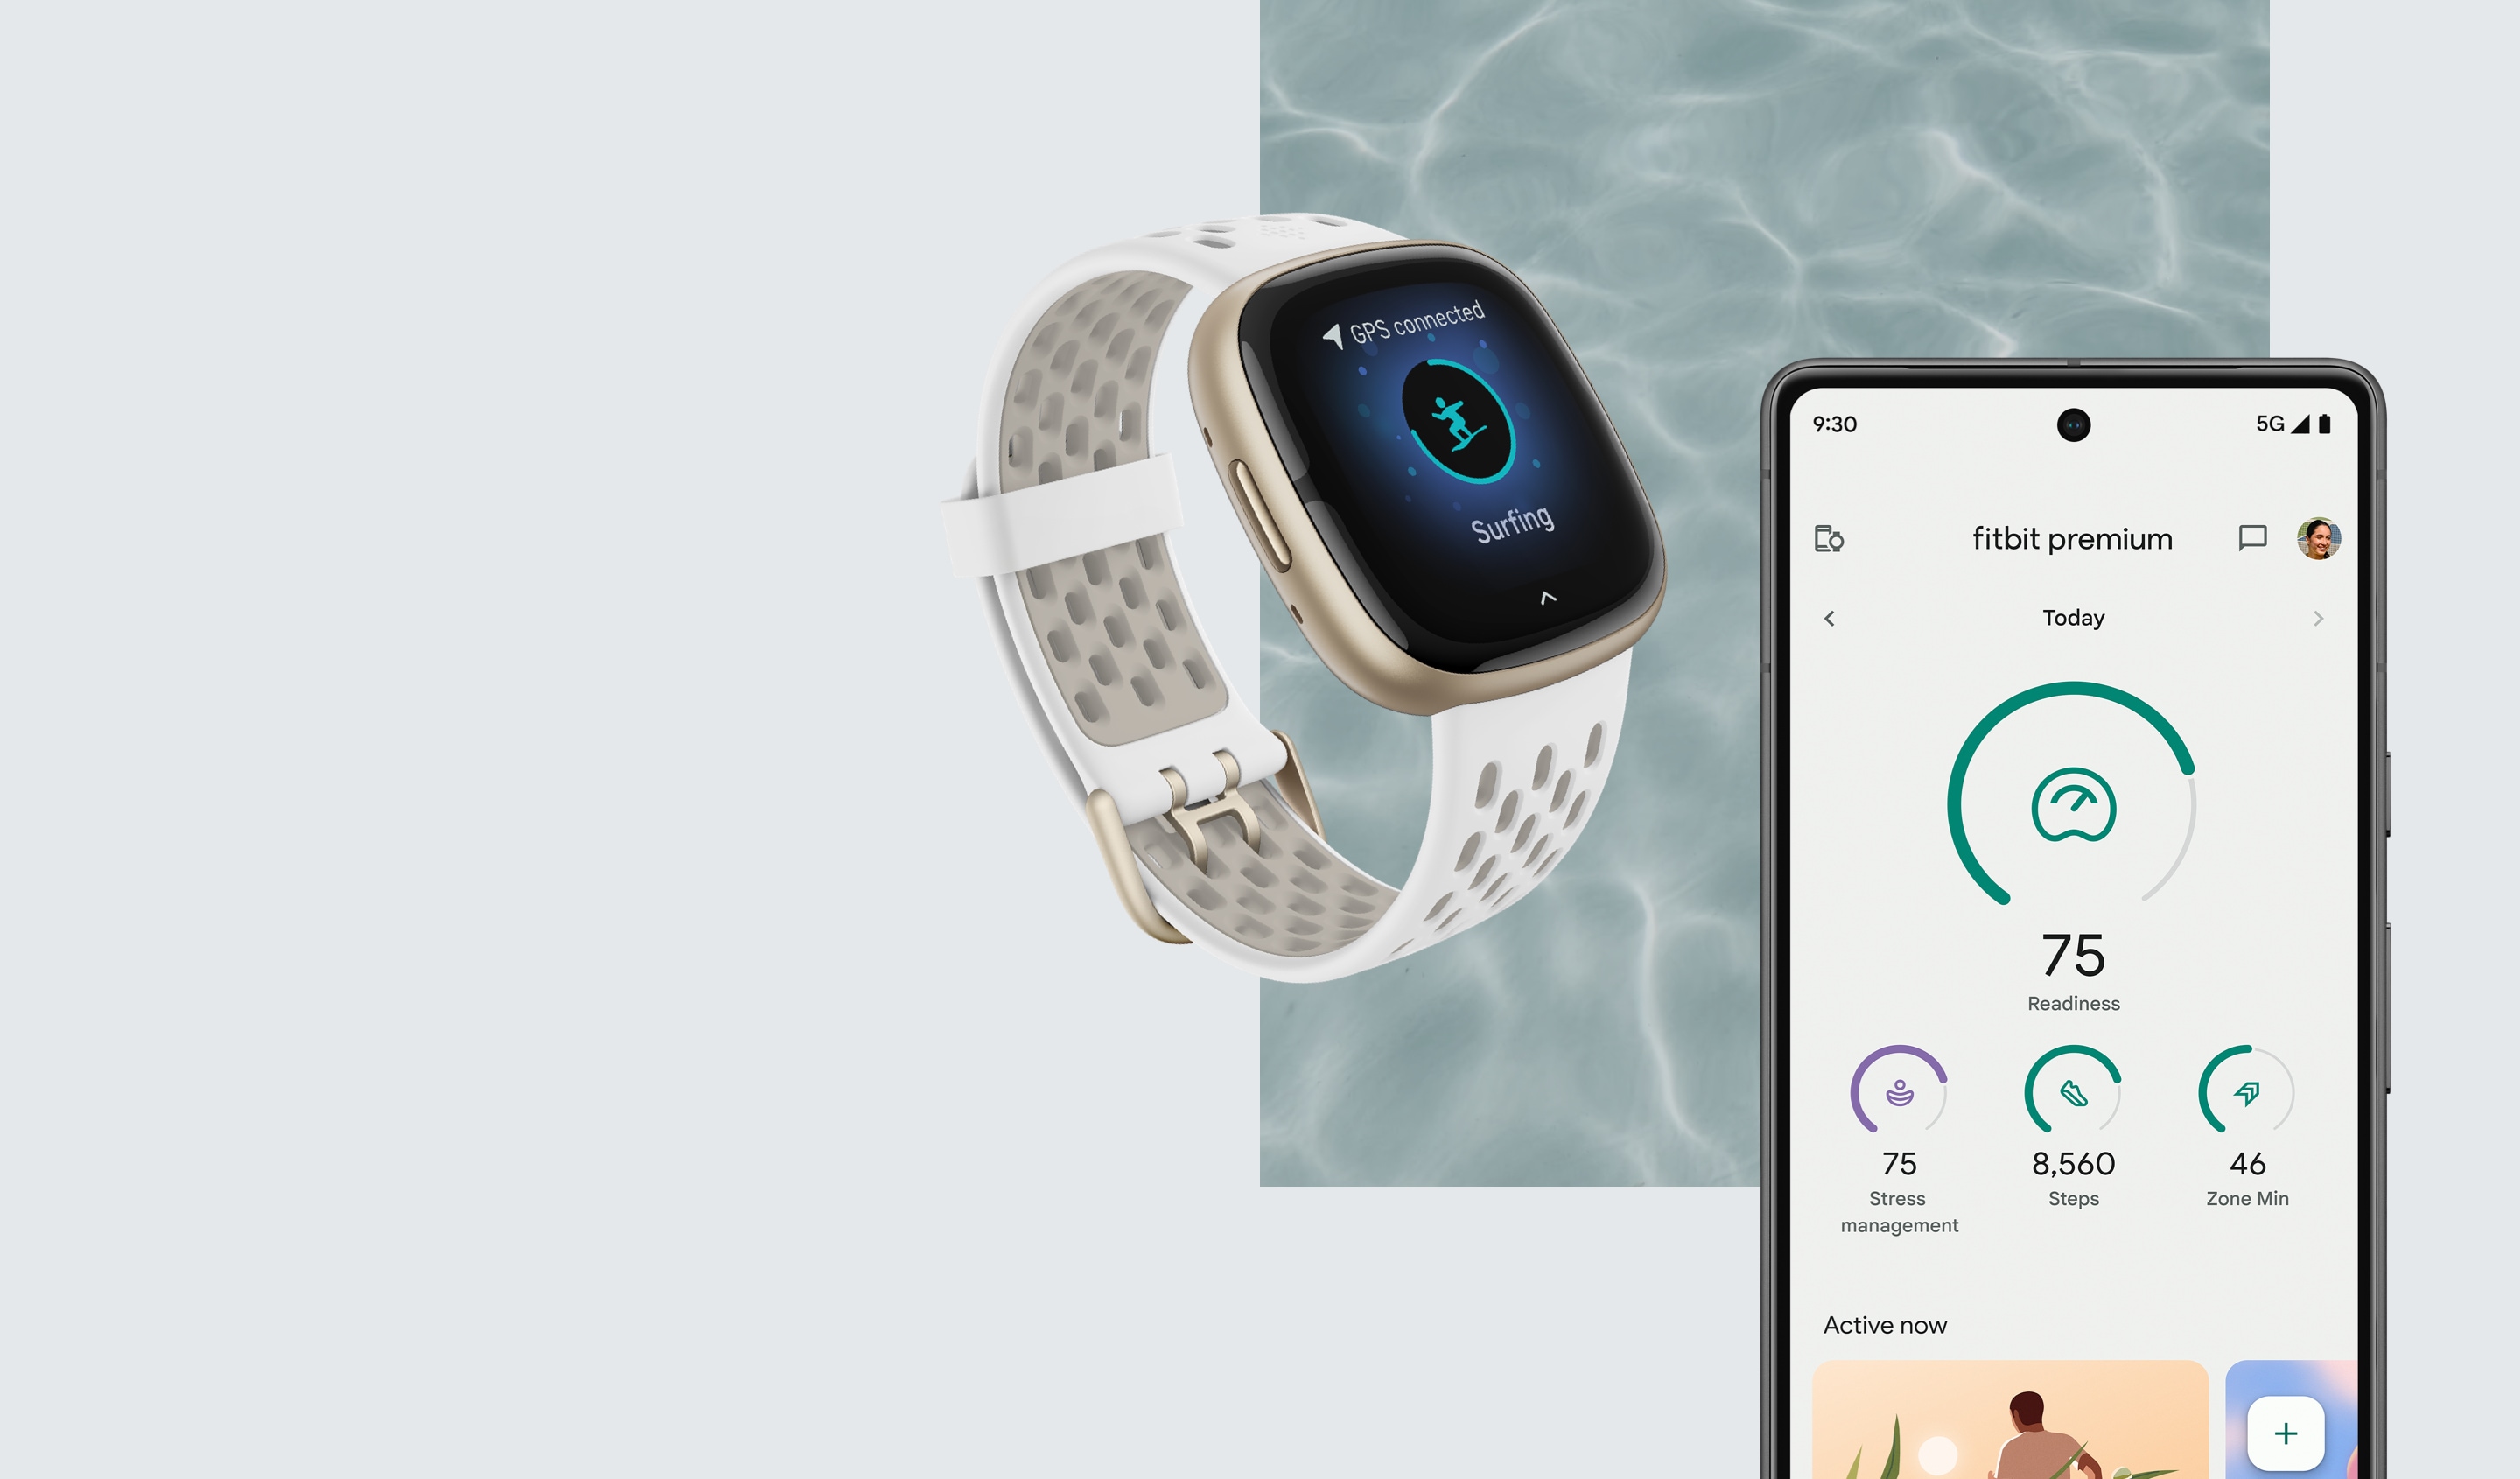 Introducing Fitbit Sense in Sage Grey, Plus New Accessories For Your Fitbit  Smartwatch - Fitbit Blog